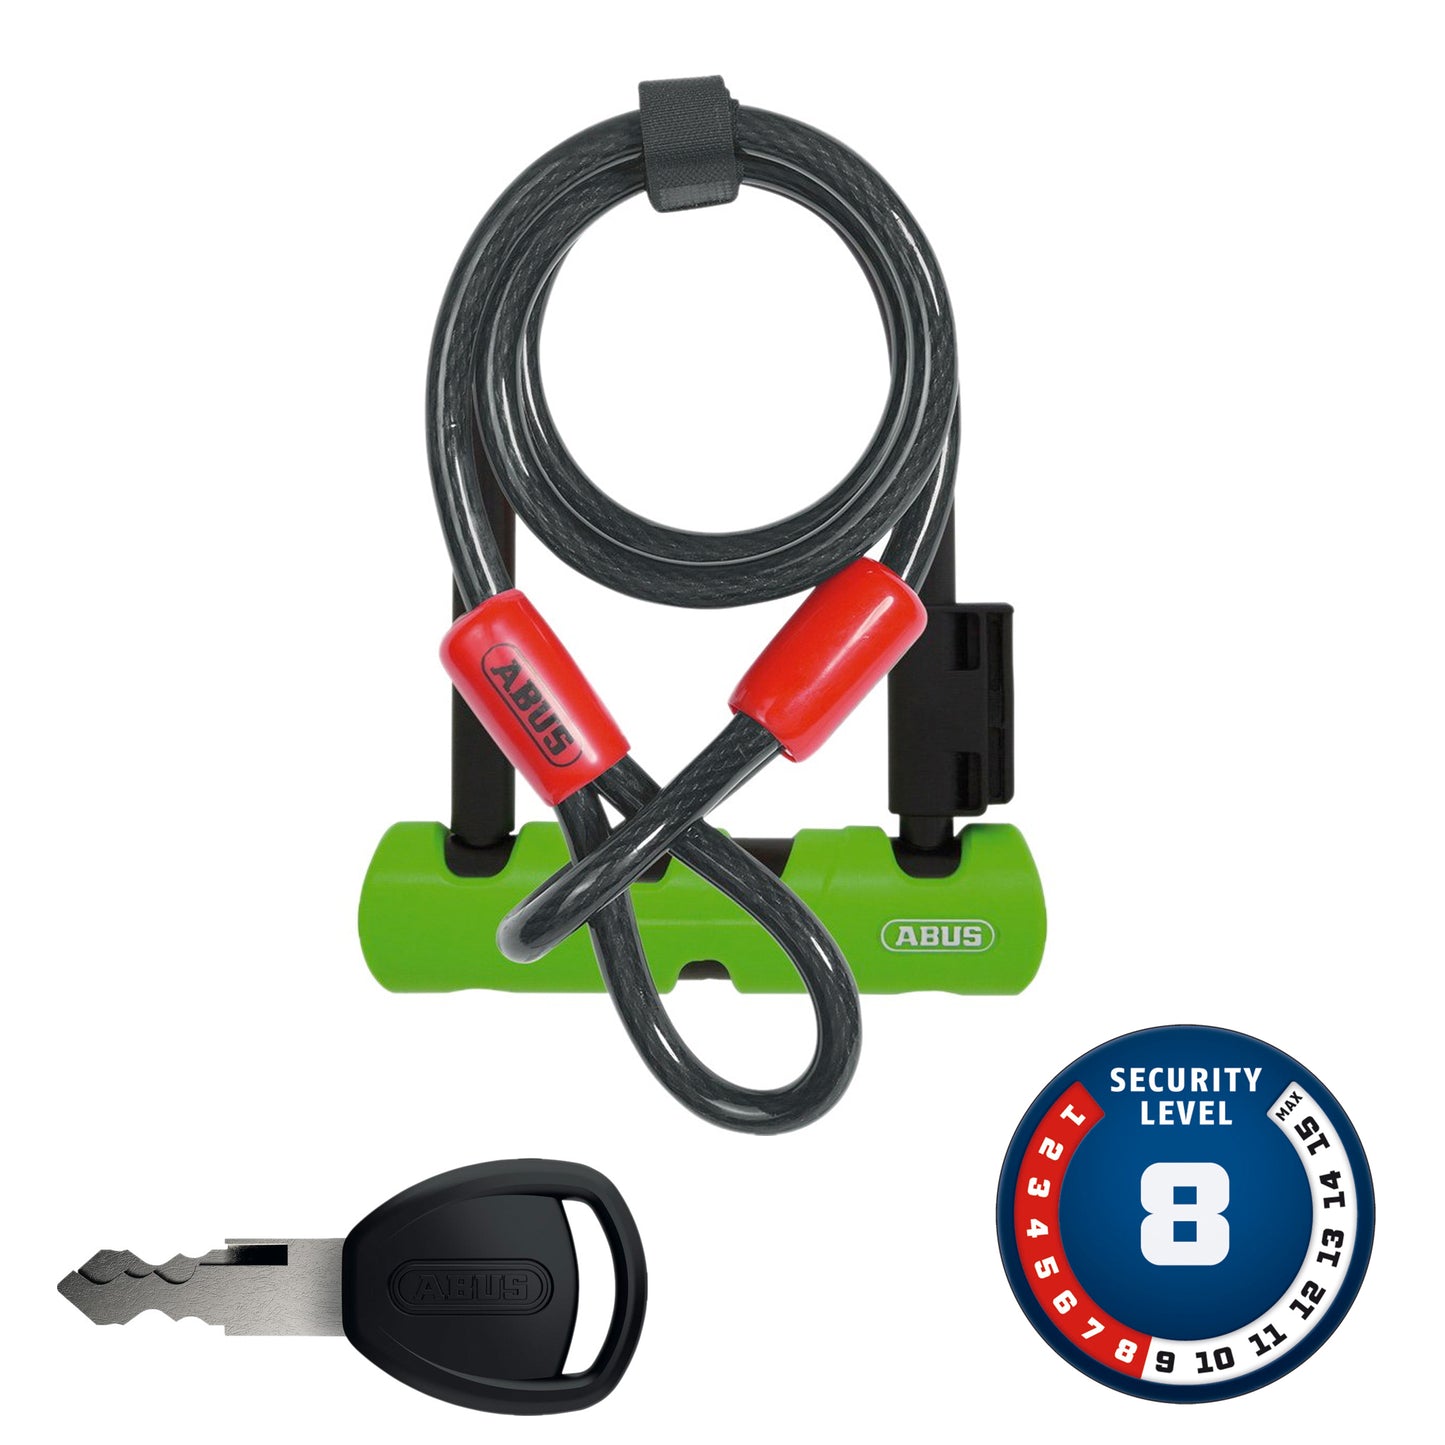 Abus Ultra Mini 410+ Loop Cable buy now at Woolys Wheels bike shop Sydney with free delivery